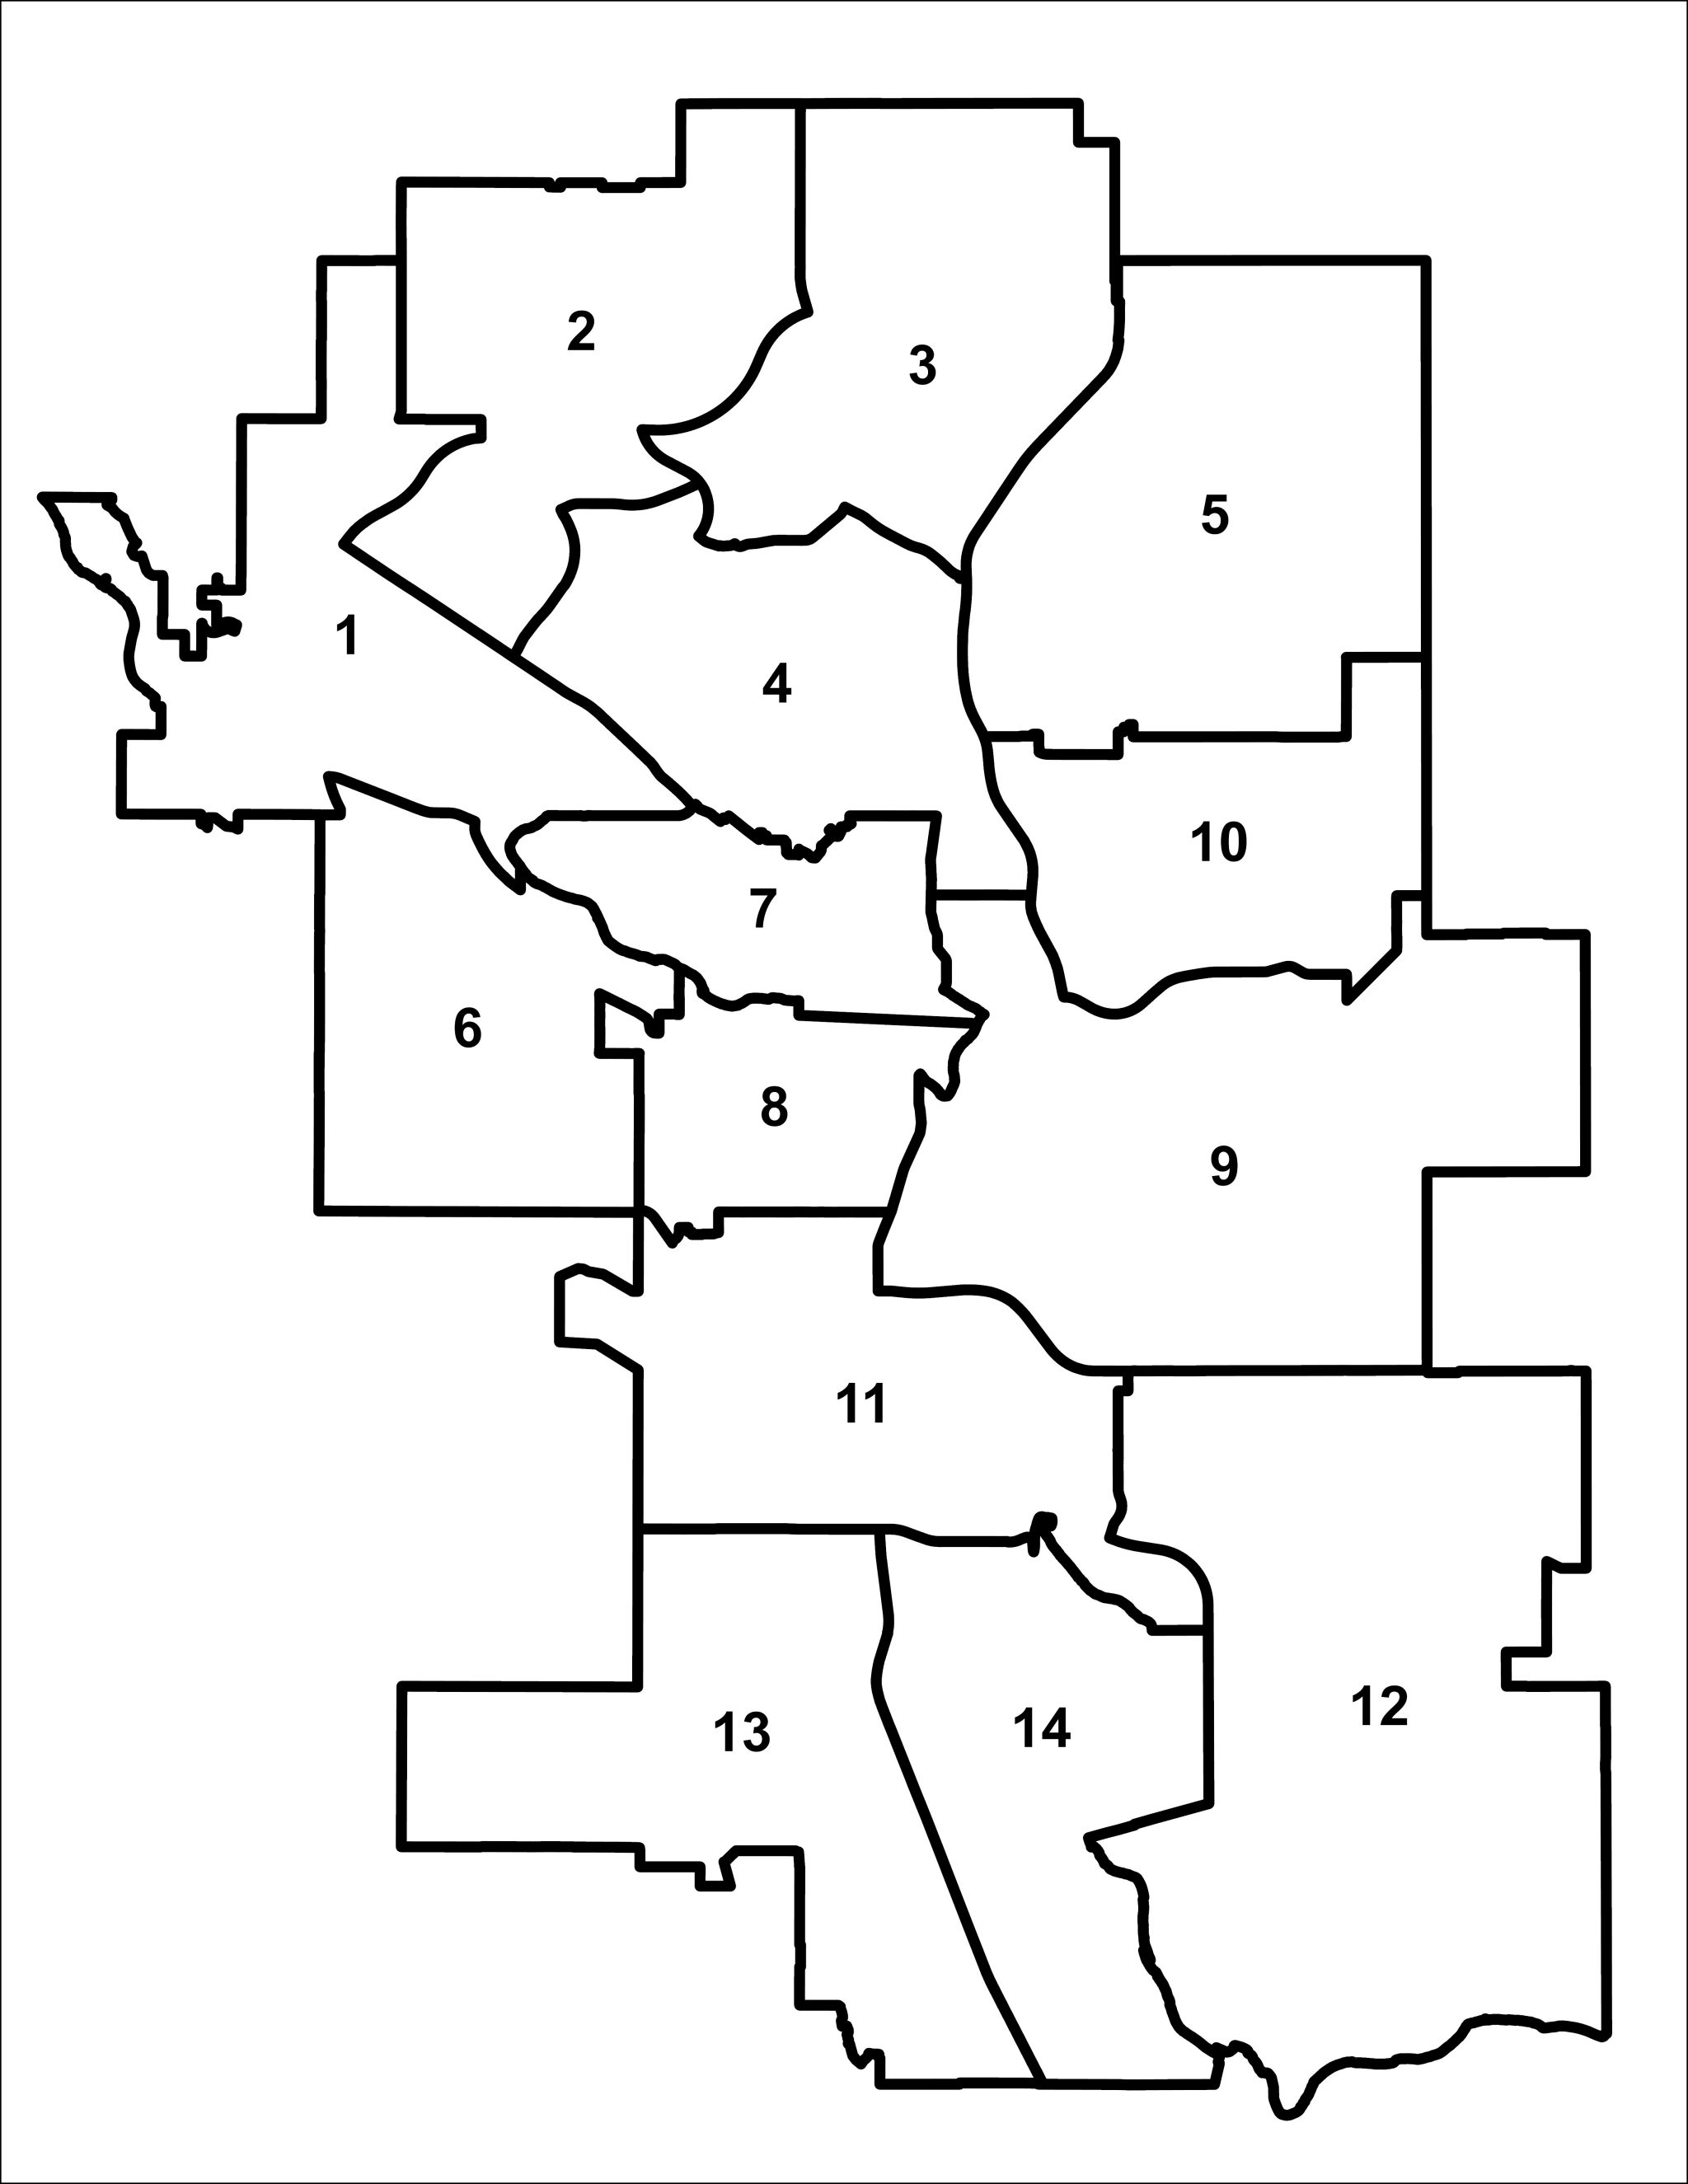 Ward map showing where the ward boundaries are